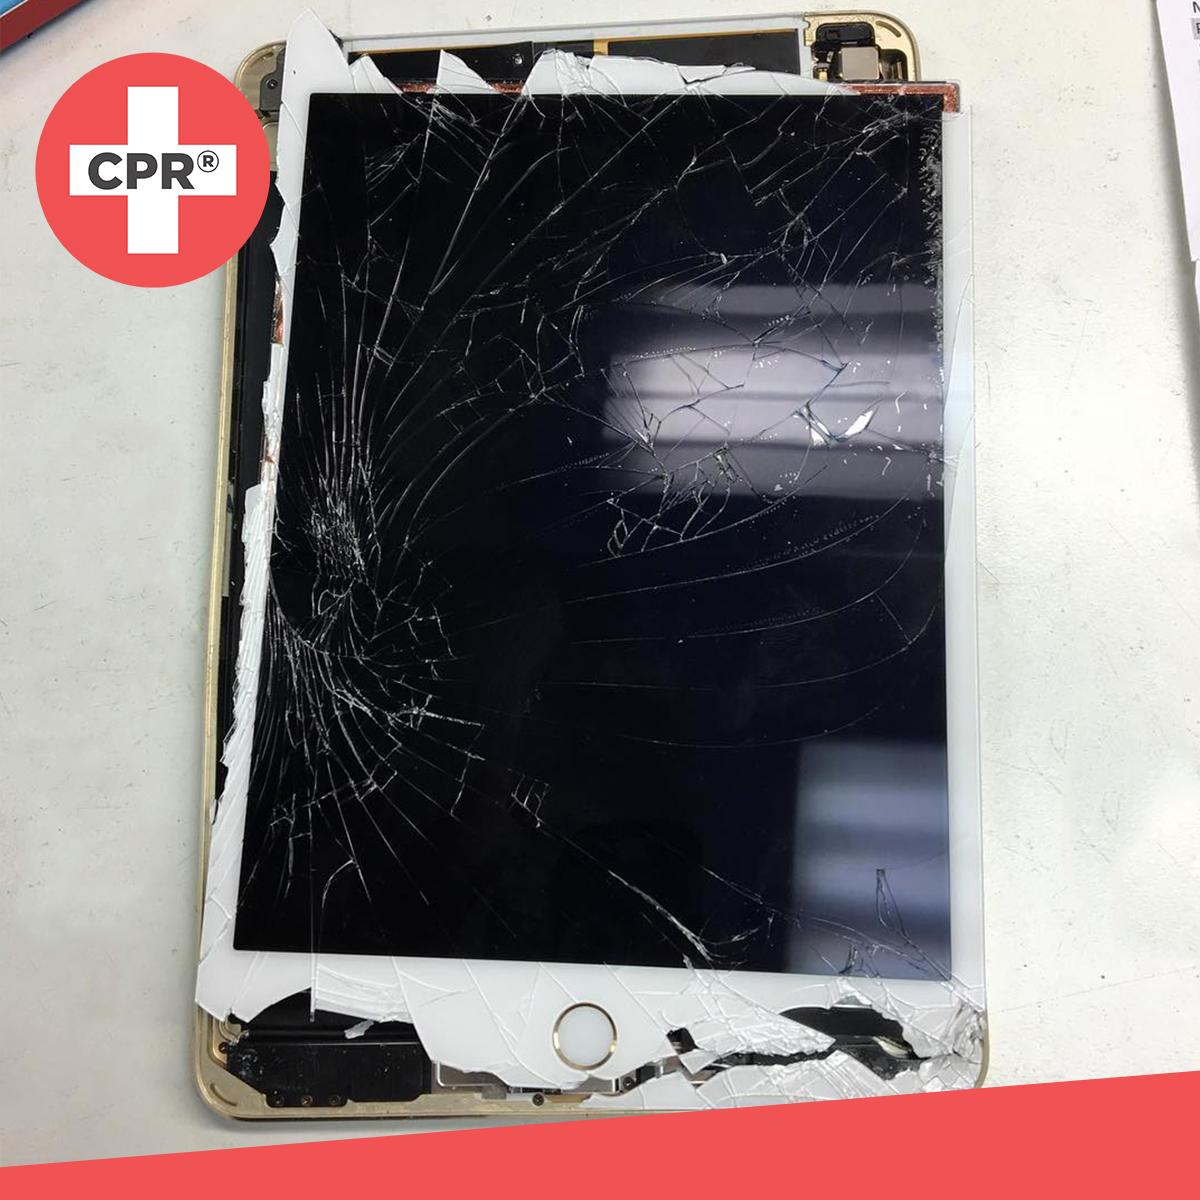 Do you have a cracked iPad that you dont know what to do with? Bring it in! Drop it off for a day or 2 and we will make your iPad look brand new again! #iPadRepair #Apple #CPR #iPadScreenRepair